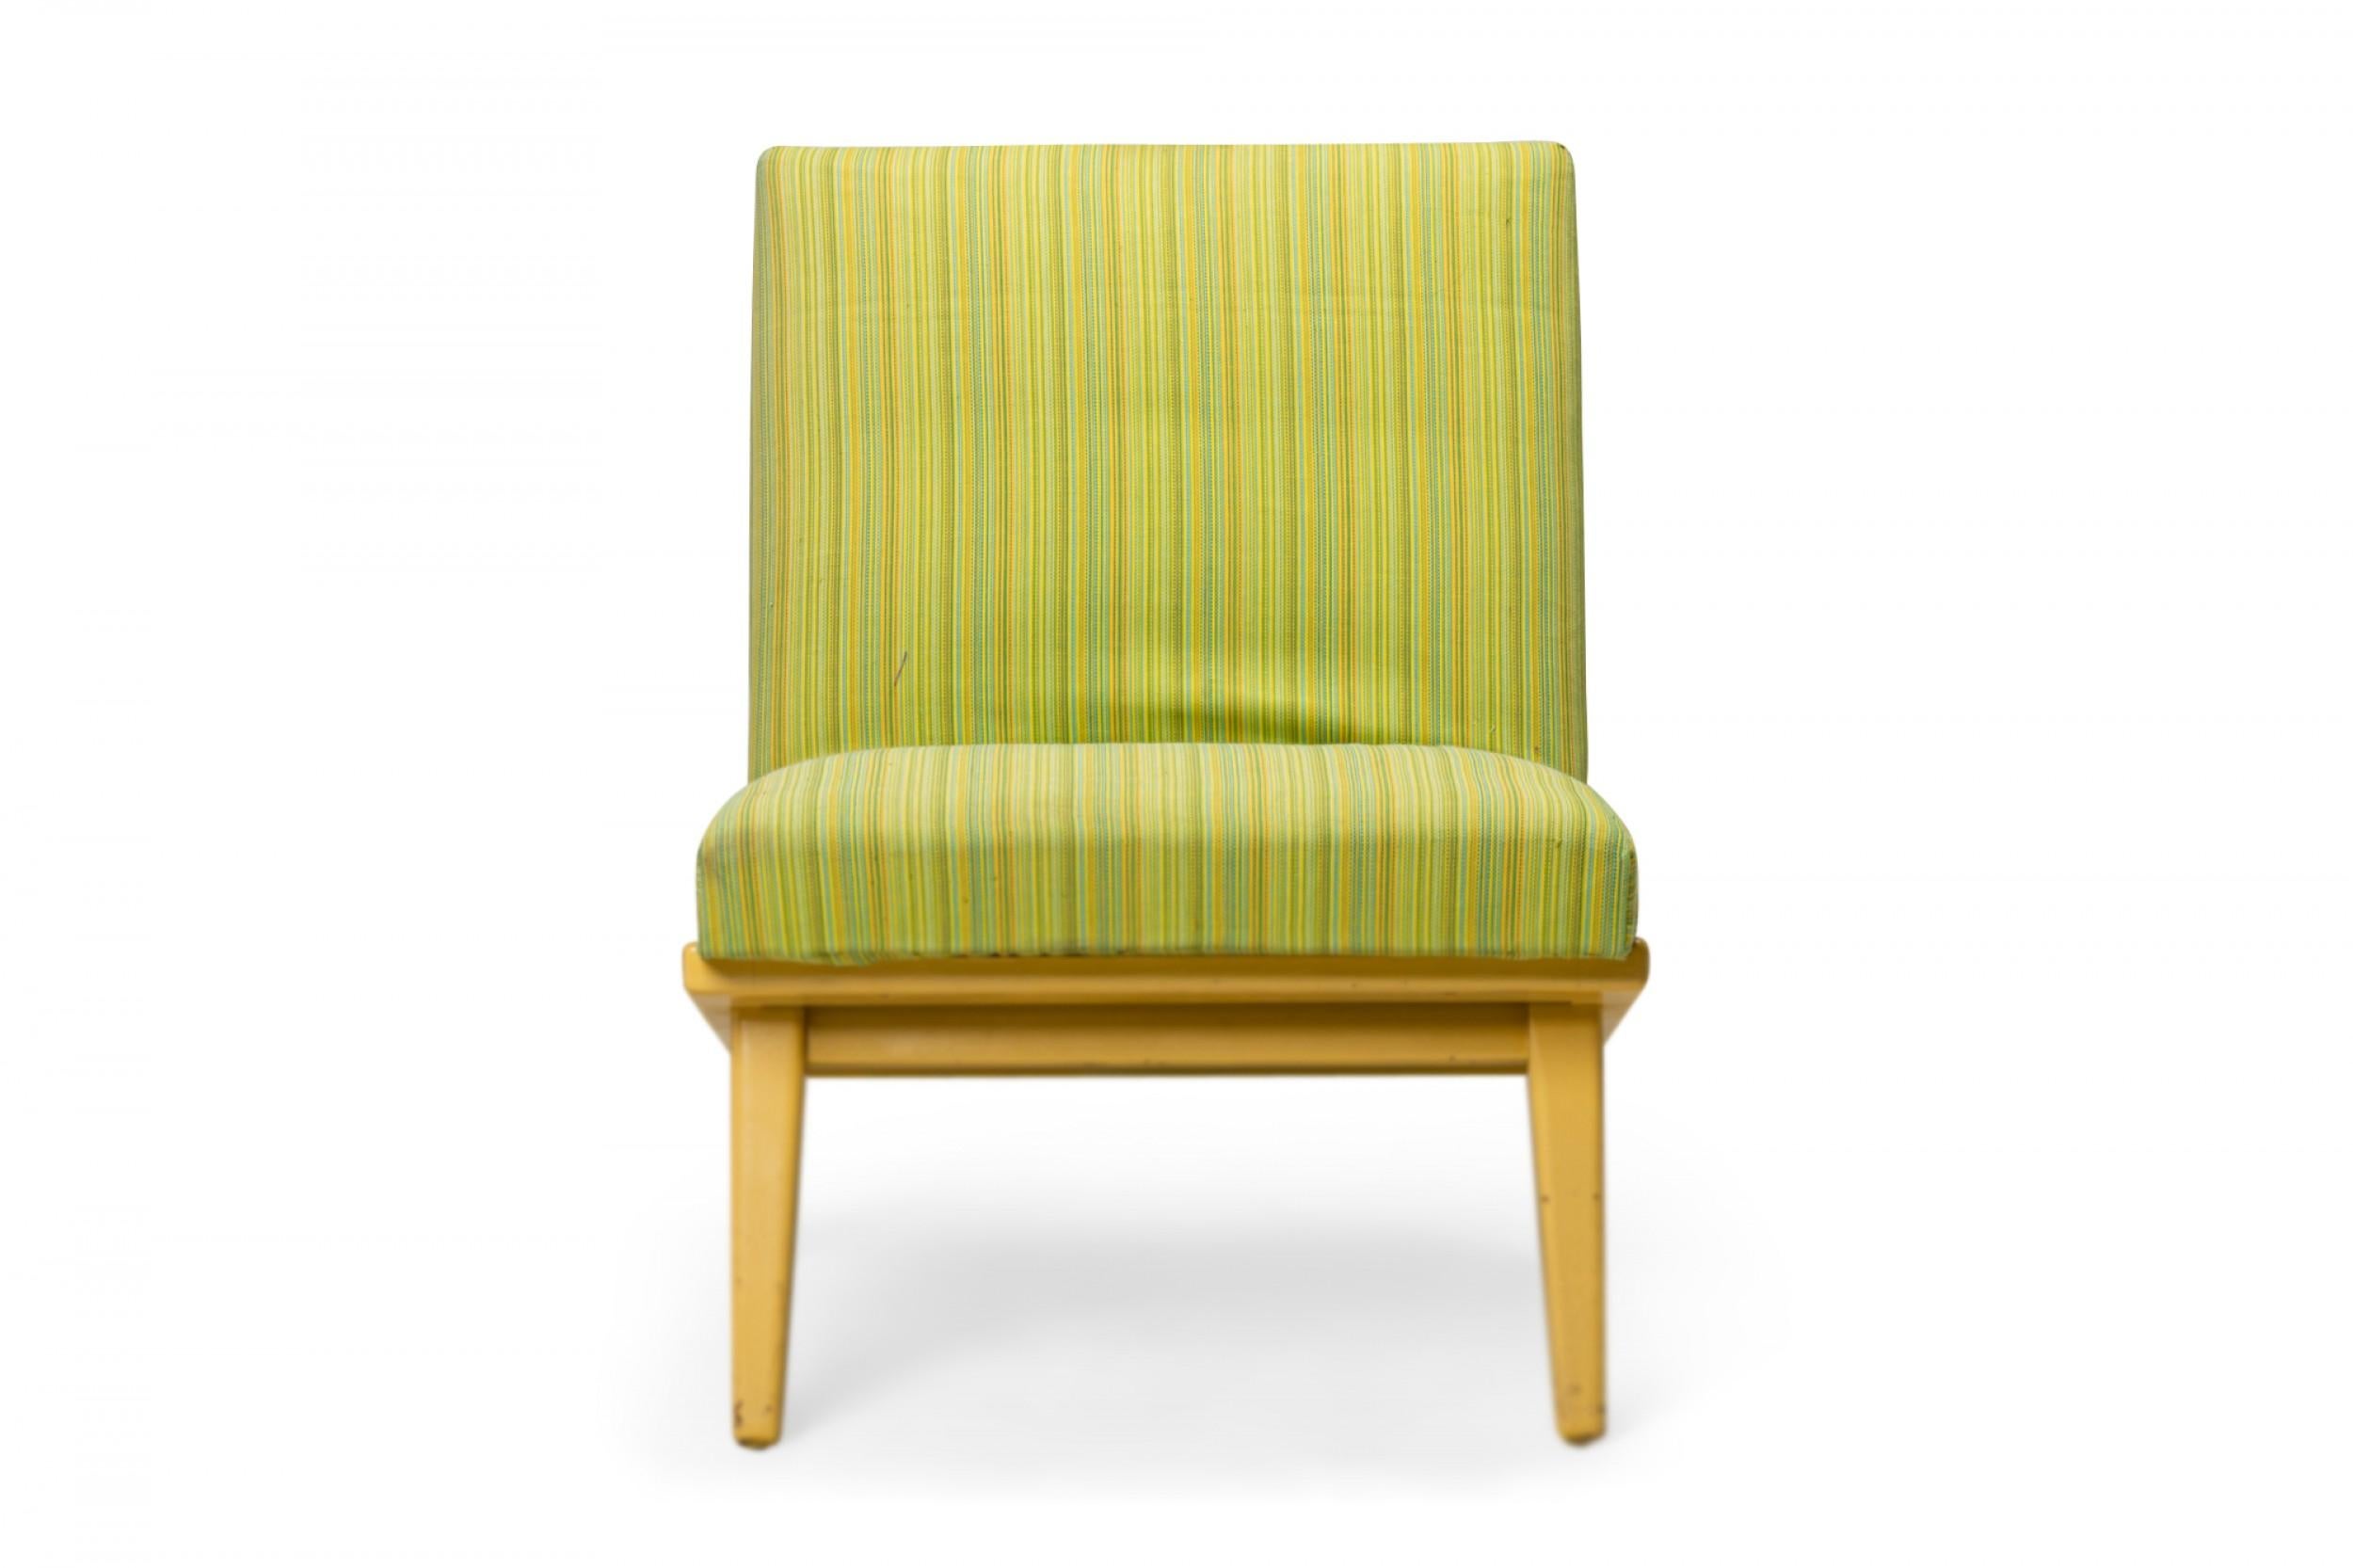 Mid-Century Modern slipper / side chair with faintly striped lime green fabric upholstery, resting on an angled blonde wood base with angled and tapered legs. (Jens Risom for Knoll).
  